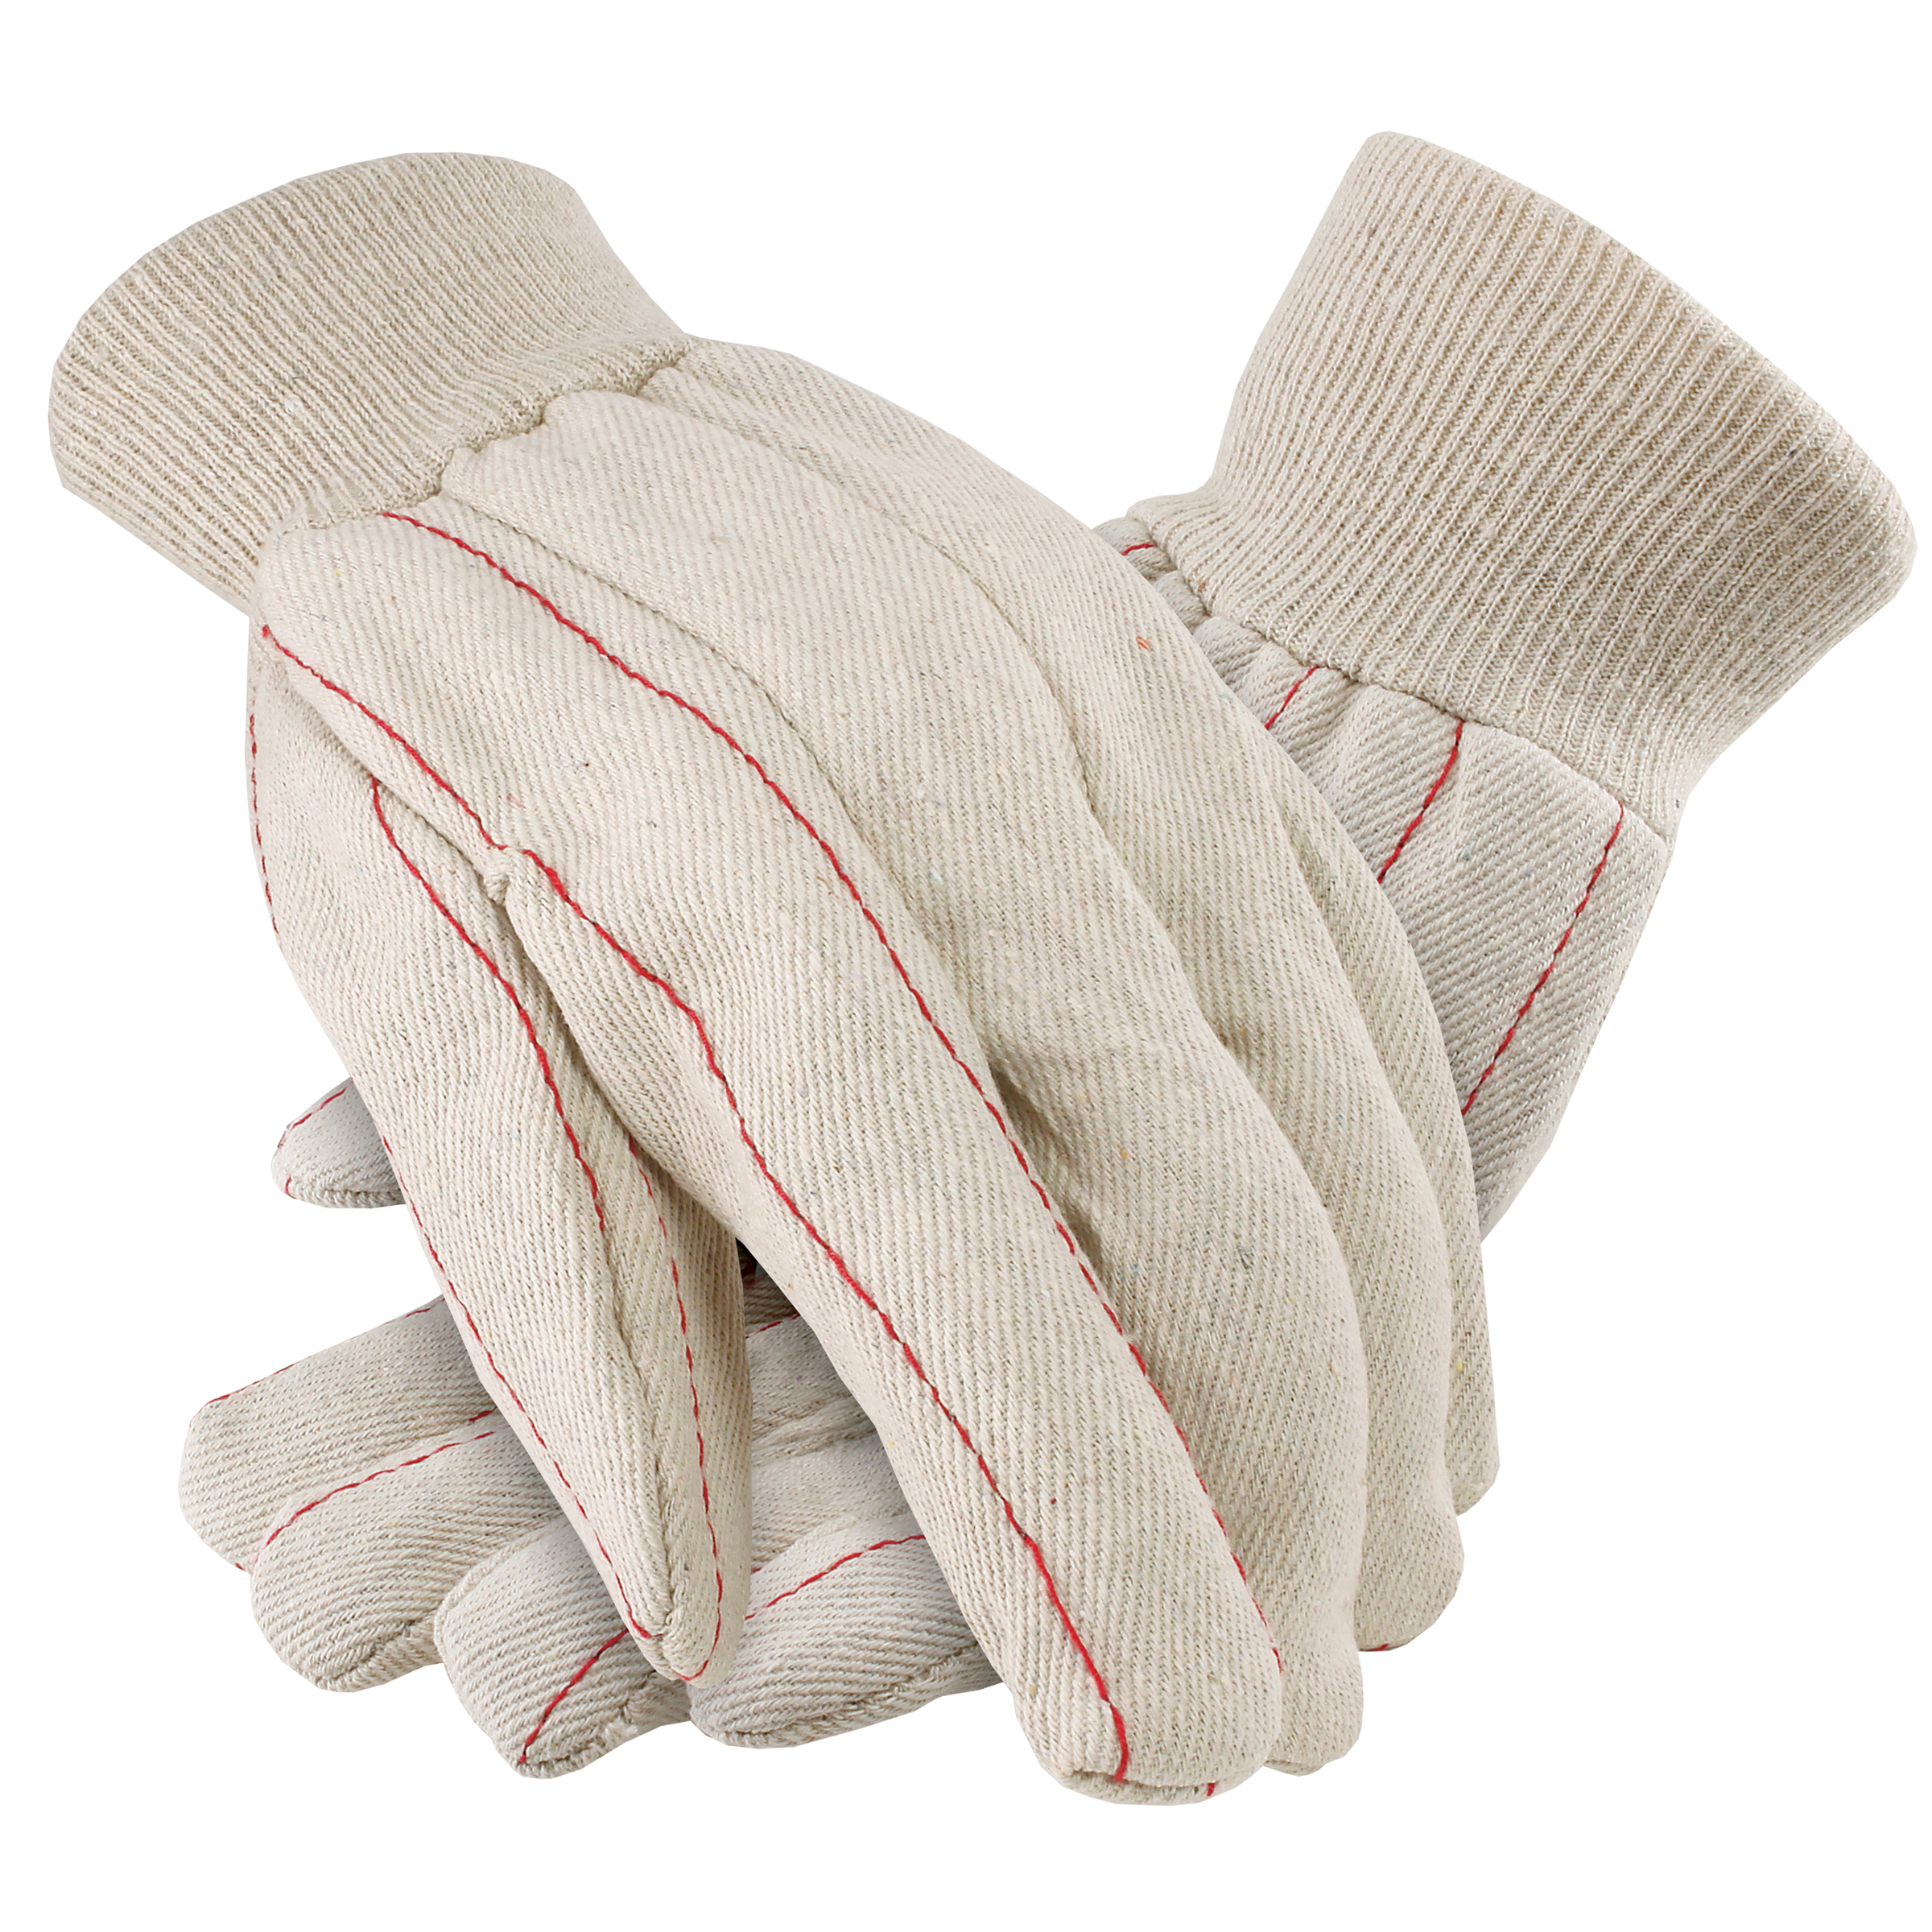 Cotton Double Palm Gloves, Knit Wrist, Made in USA